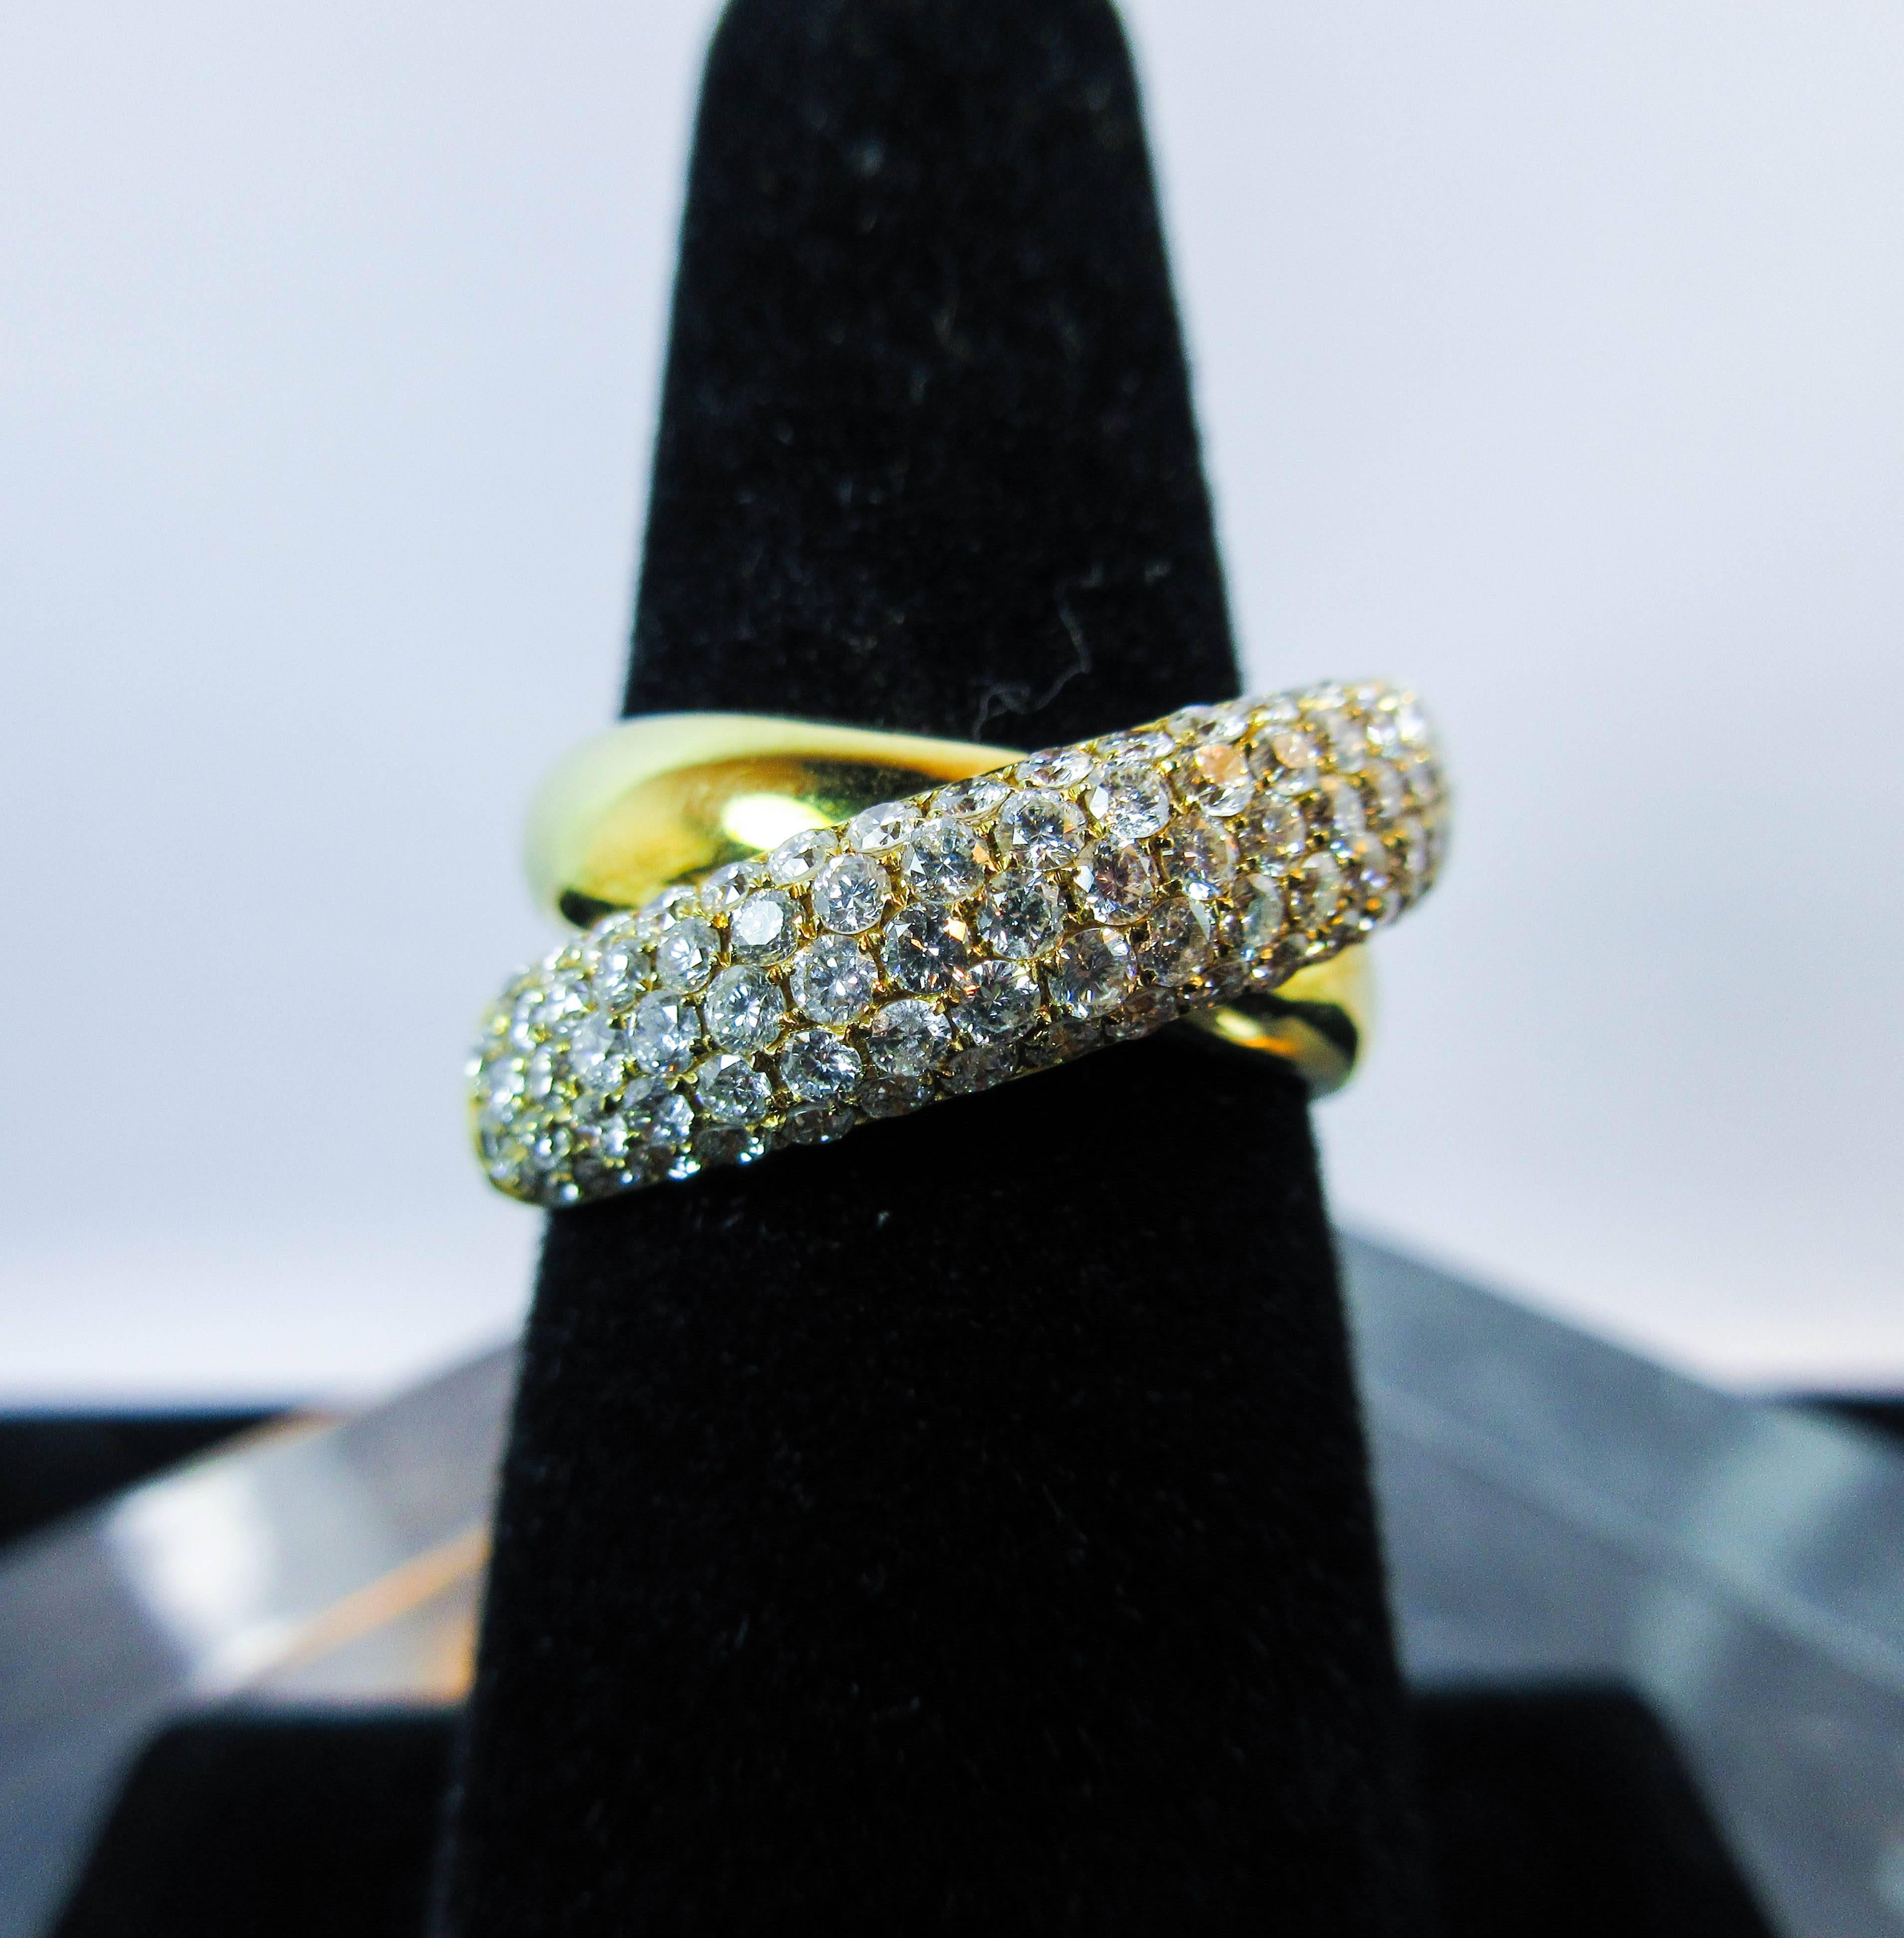 This ring is composed of 18kt yellow gold and features a stunning criss cross design with white pave diamonds. In excellent condition.

Please feel free to ask any questions you may have, we are happy to assist. 

Specs:
18KT Yellow Gold
82- Pave